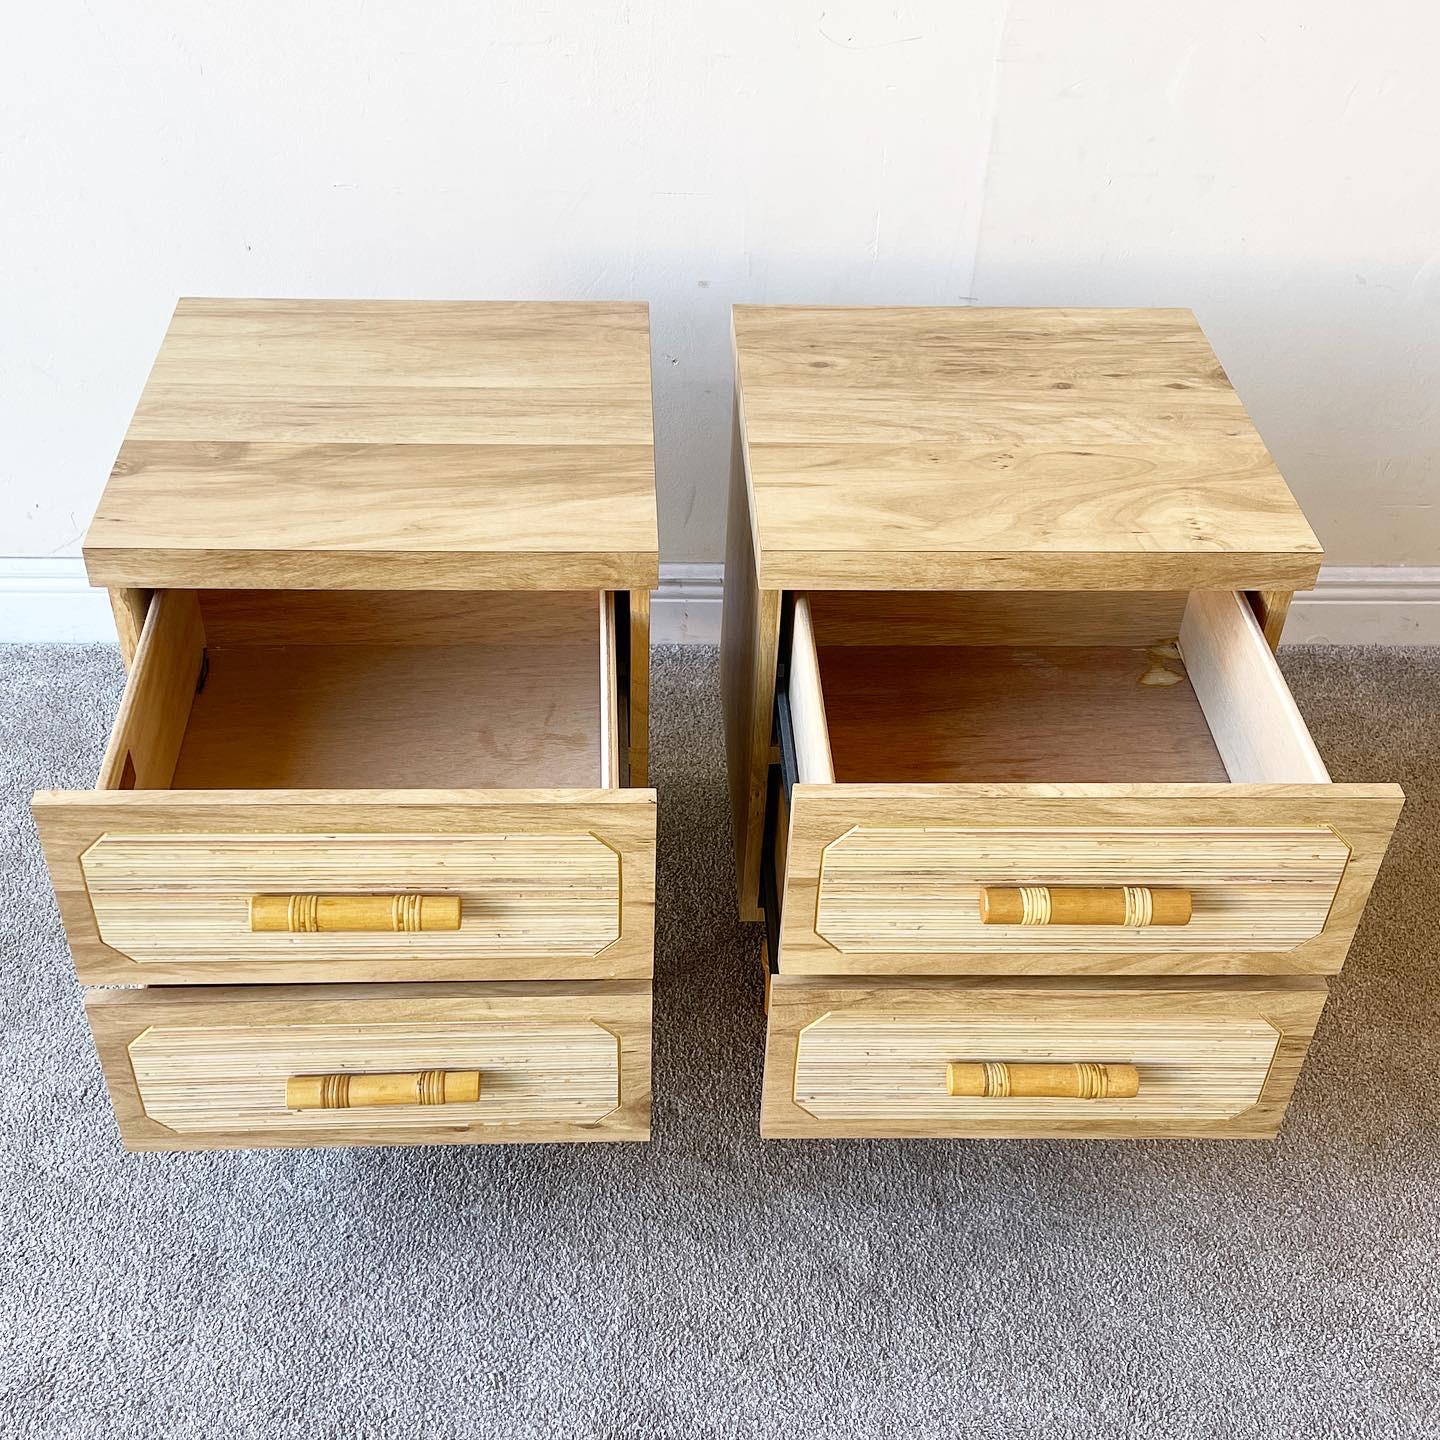 Late 20th Century Boho Chic Woodgrain Laminate and Faux Bamboo Nightstands - a Pair For Sale